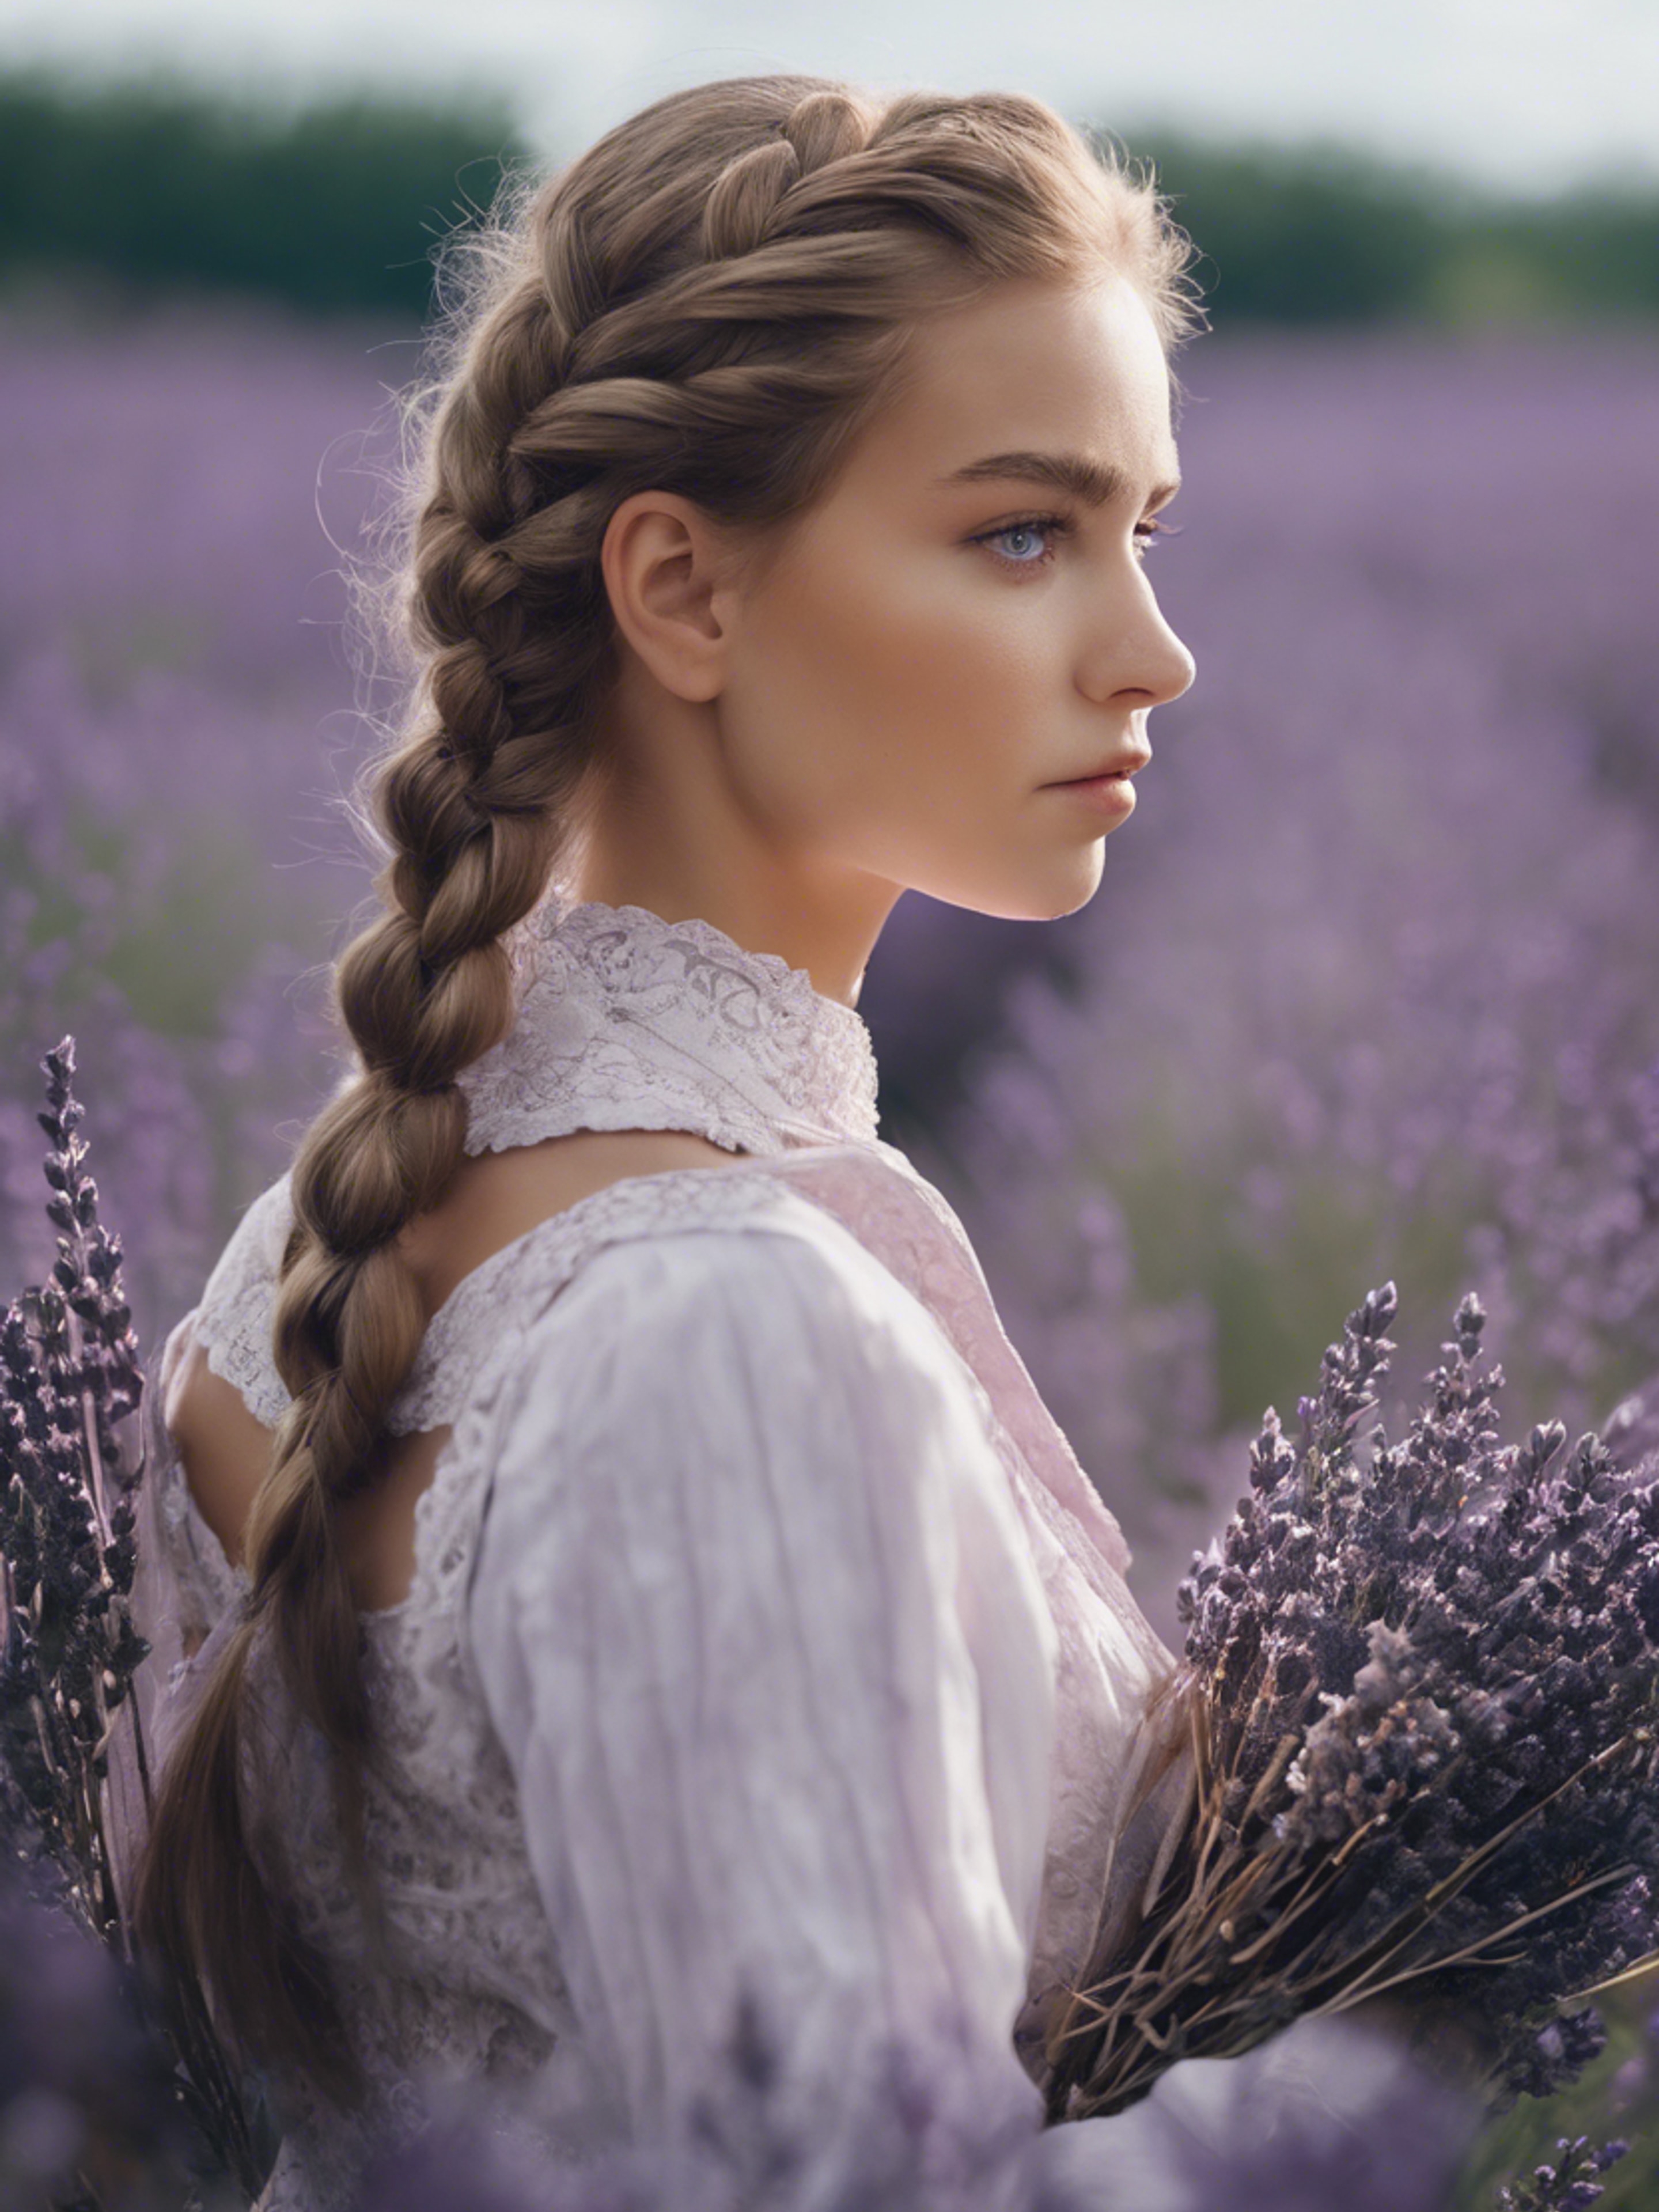 A pretty, light-eyed girl with her hair done in classic French braid, surrounded by a field of French lavender. کاغذ دیواری[c71d23e36c7041a09435]